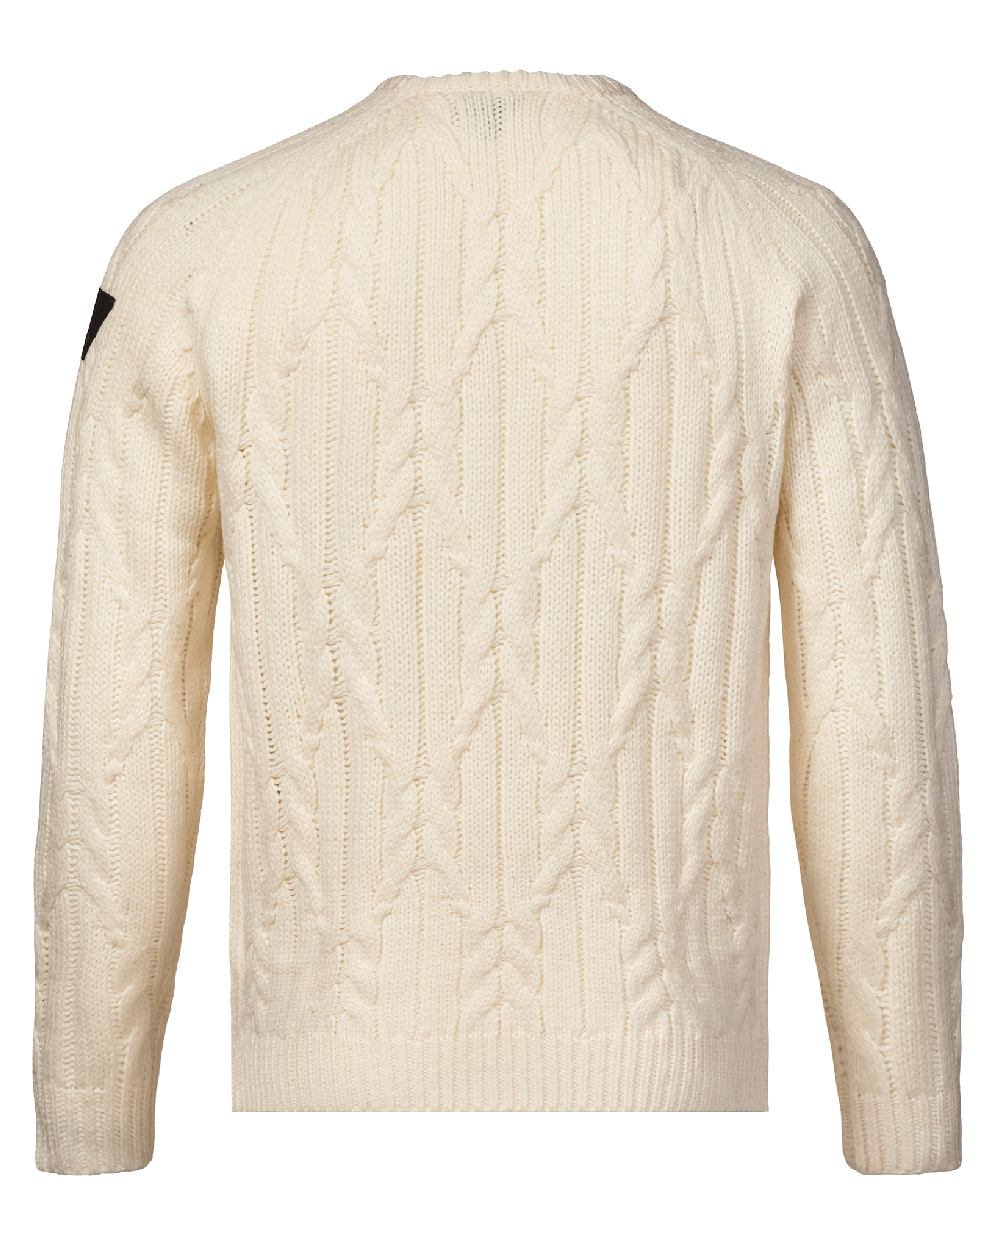 Musto Mens Marina Cable Knit Jumper in Antique Sail White 